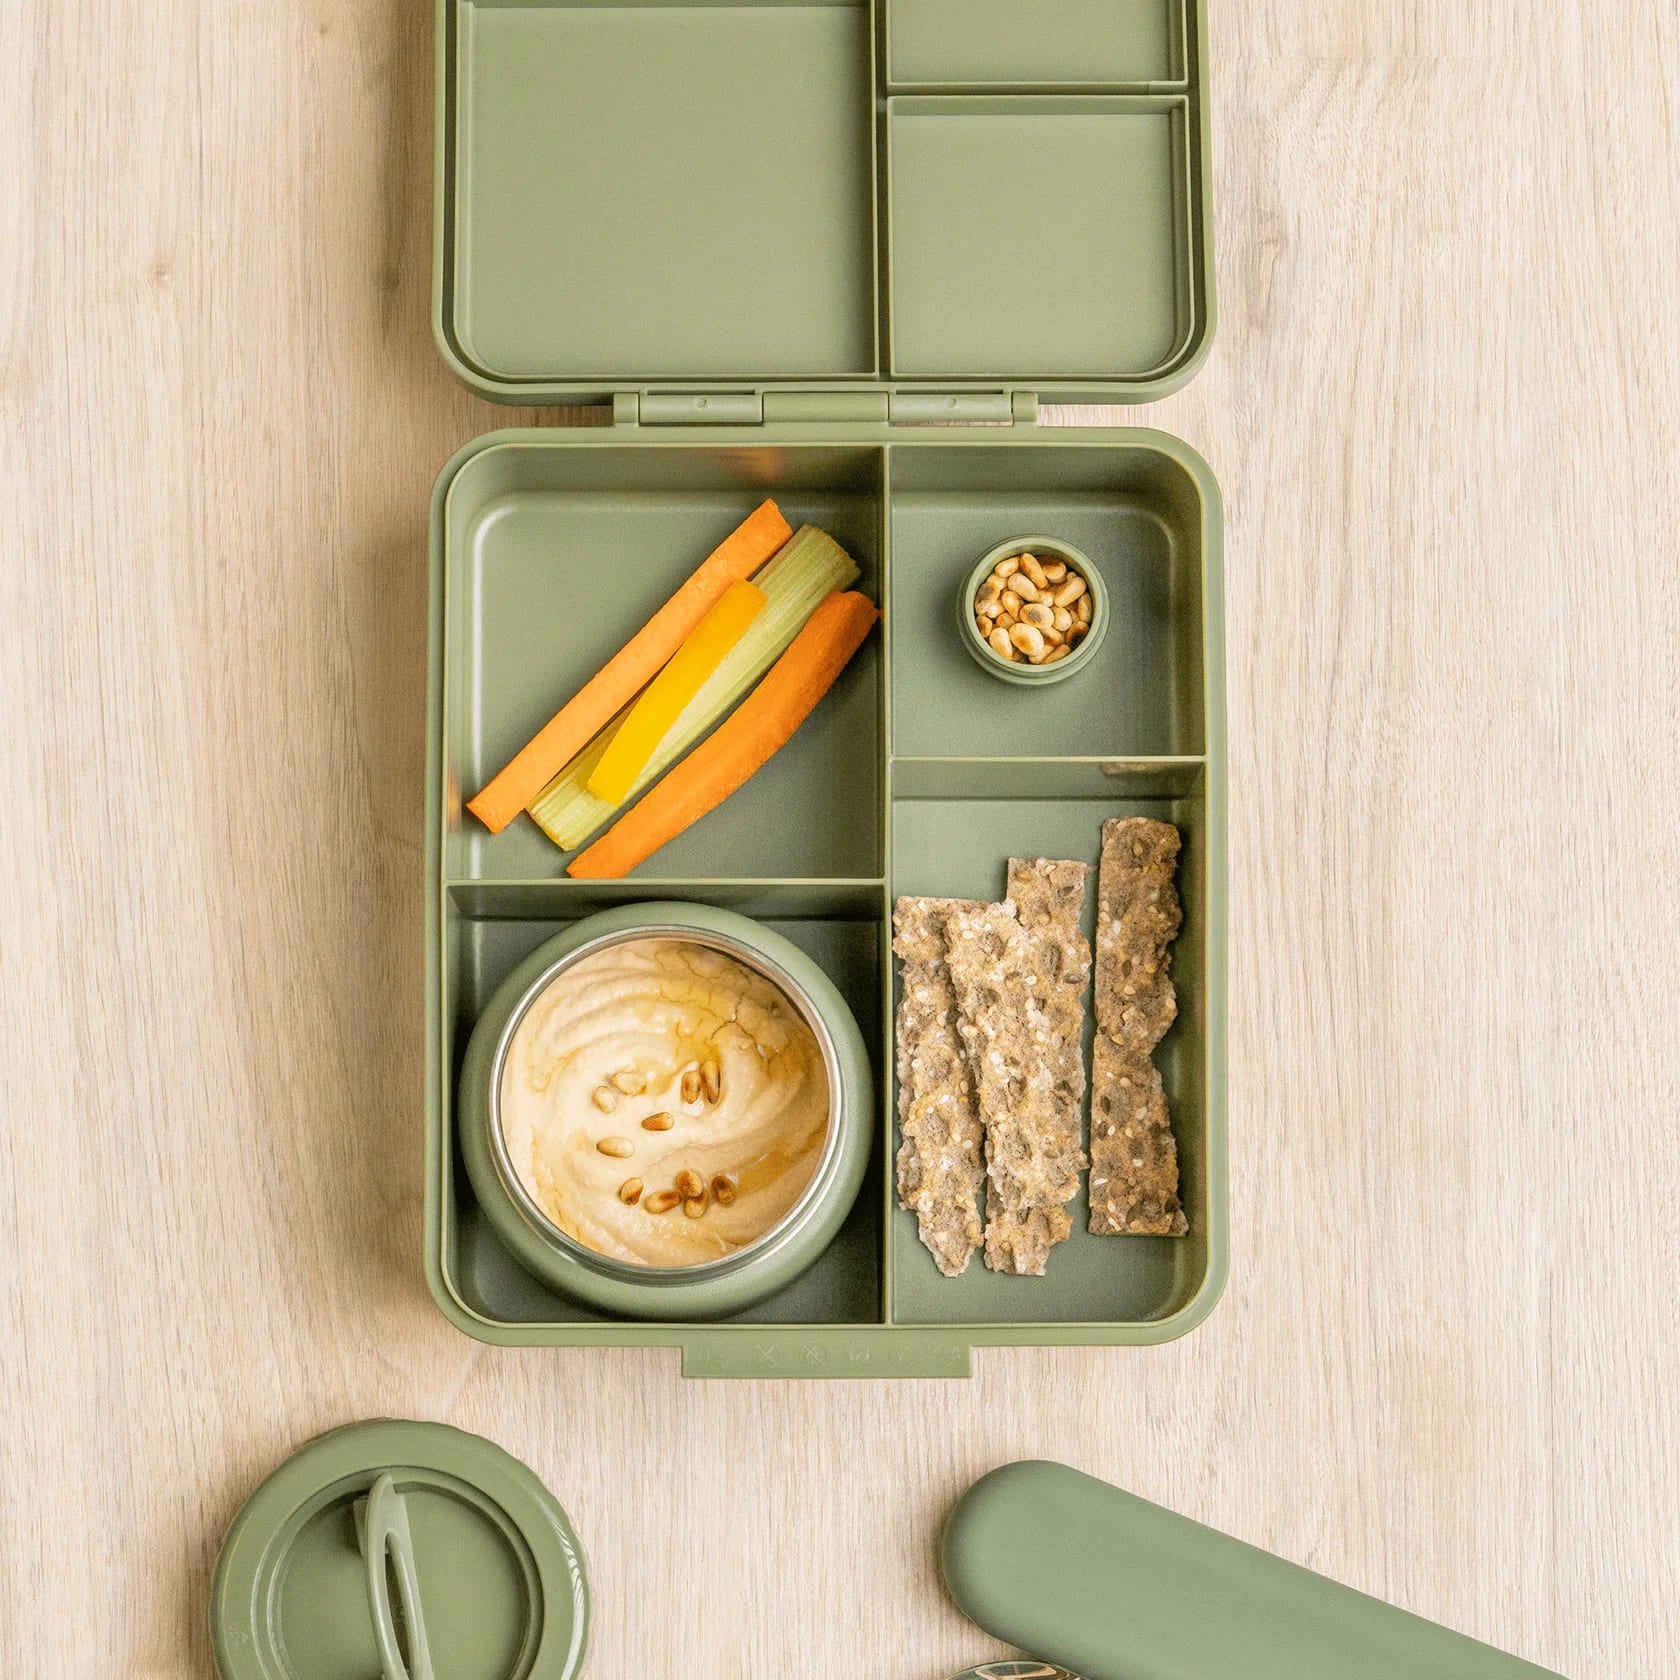 Citron Grand School Lunch Box 4 Compartments with Insulated Food Jar - Green